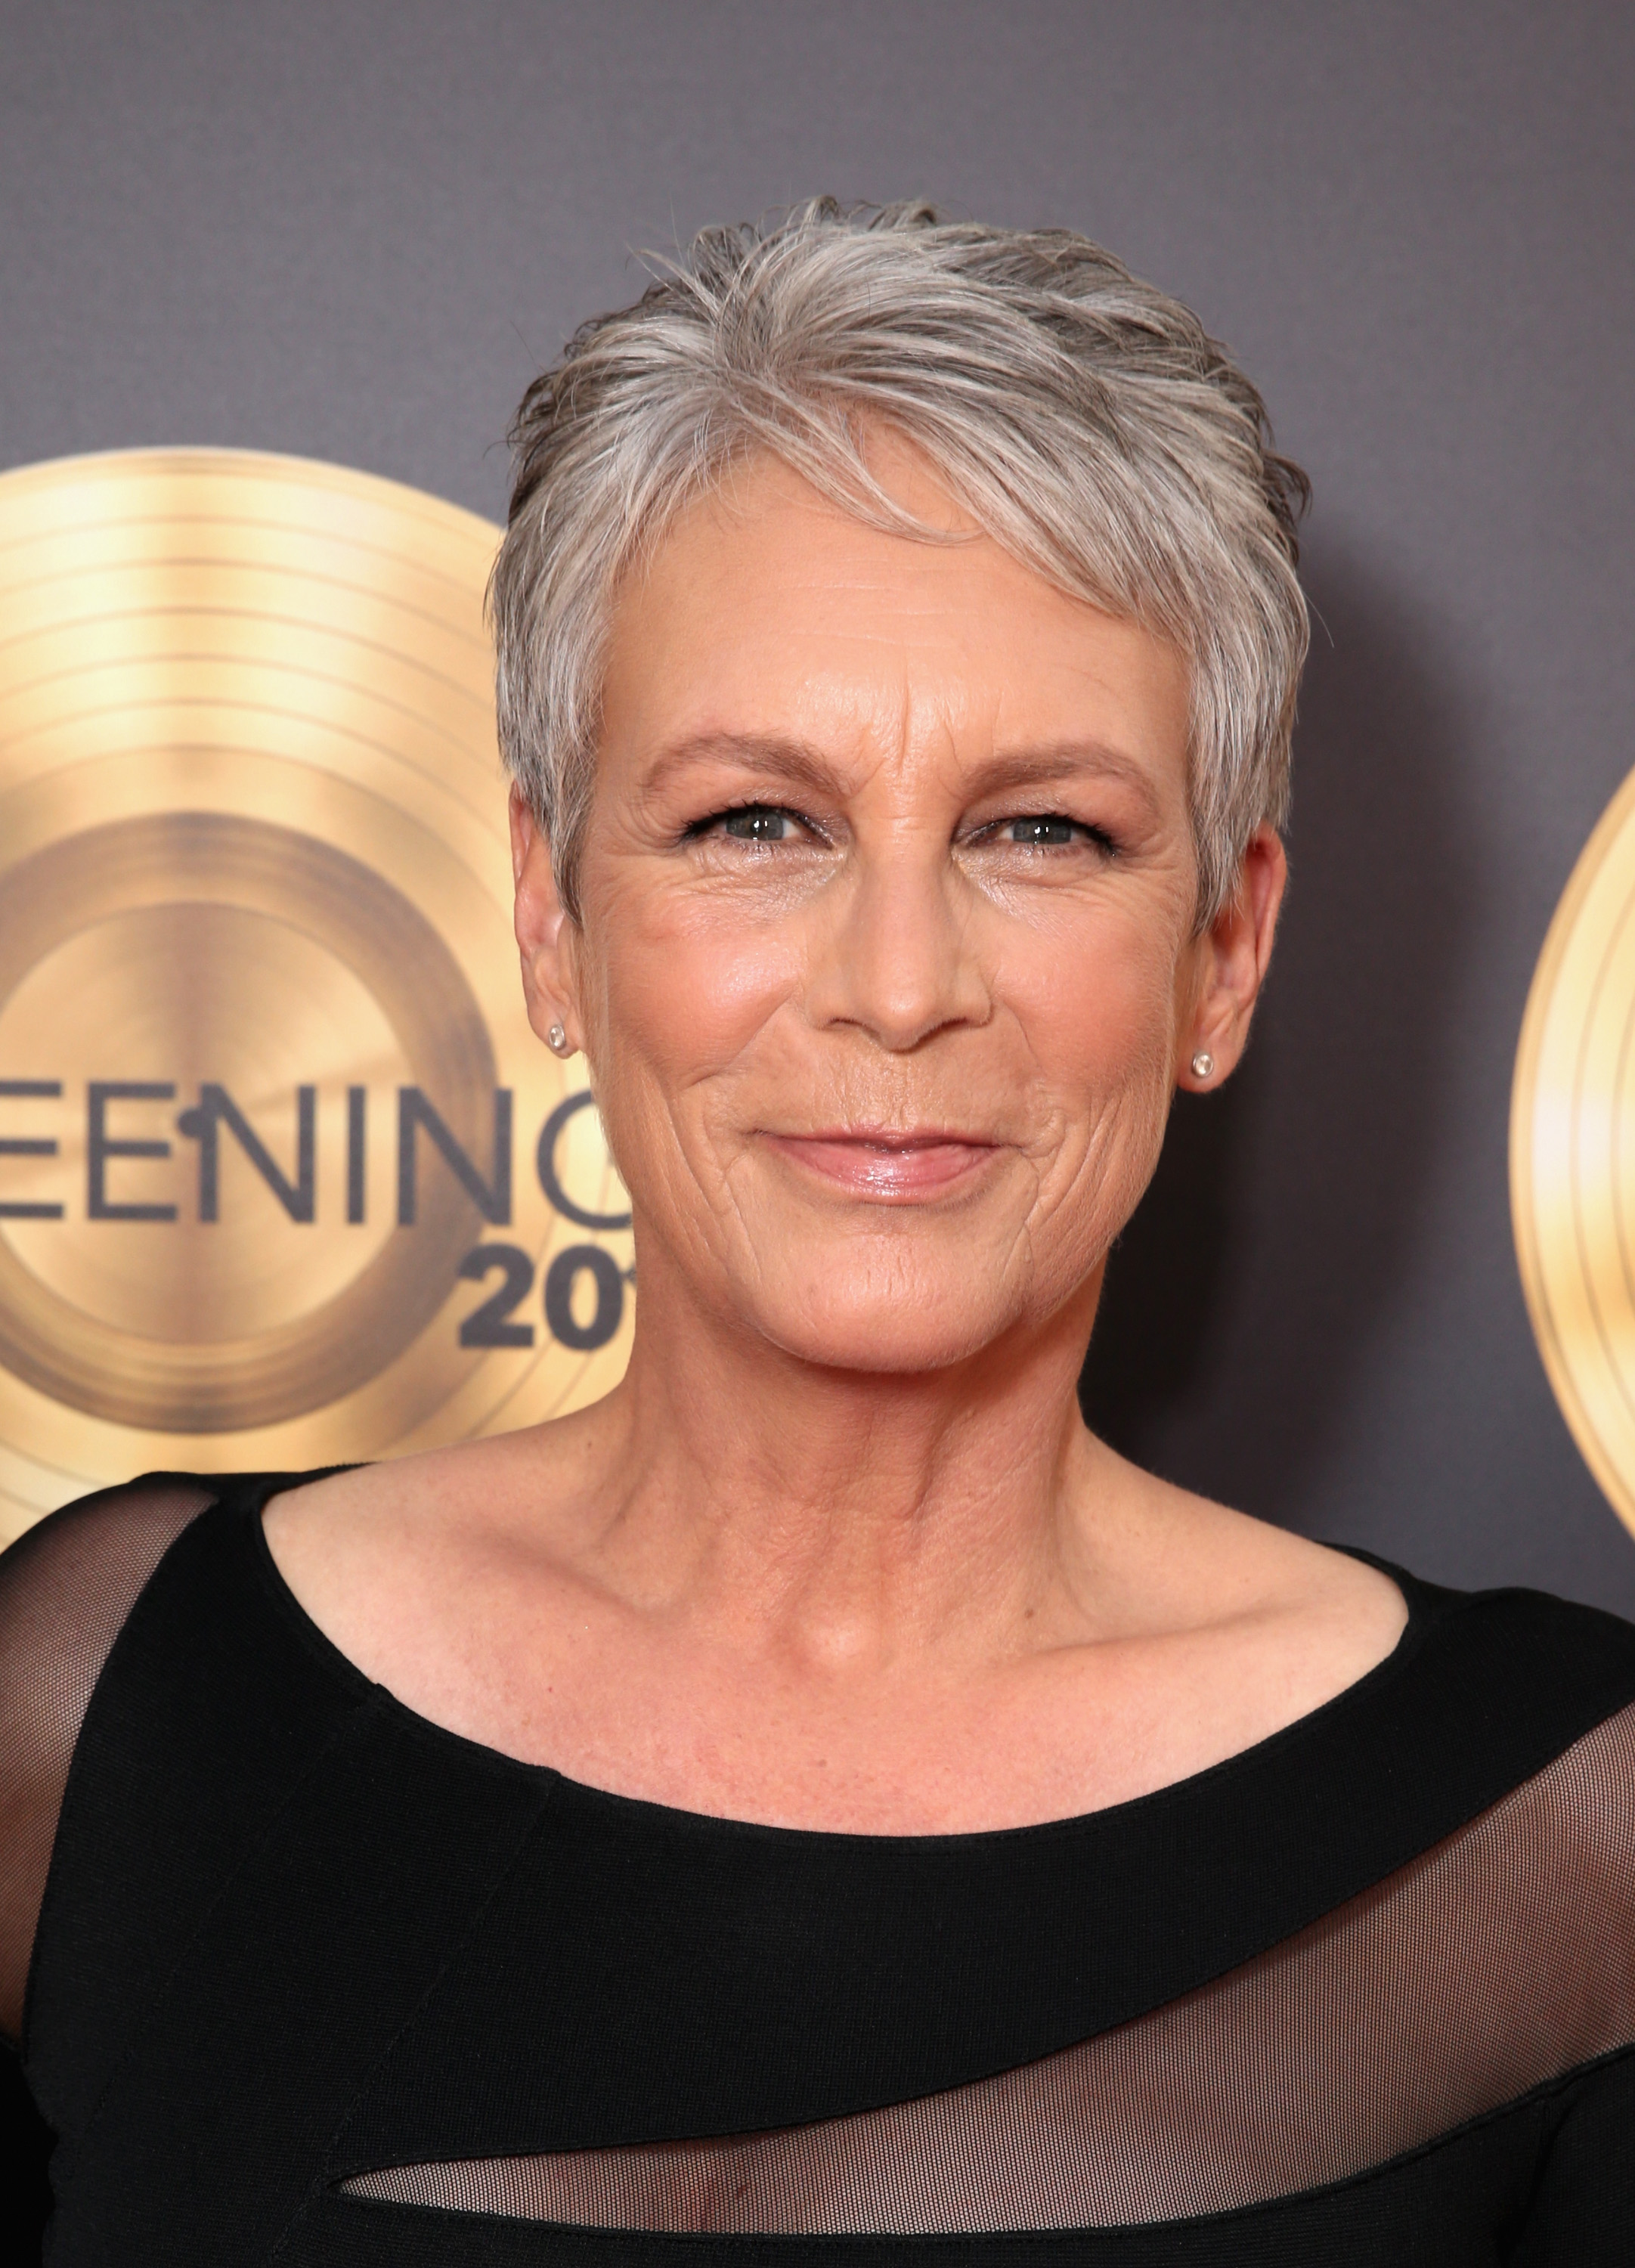 Jamie Lee Curtis attends the FOX Los Angeles Screenings Party in Los Angeles, California, on May 21, 2015. | Source: Getty Images